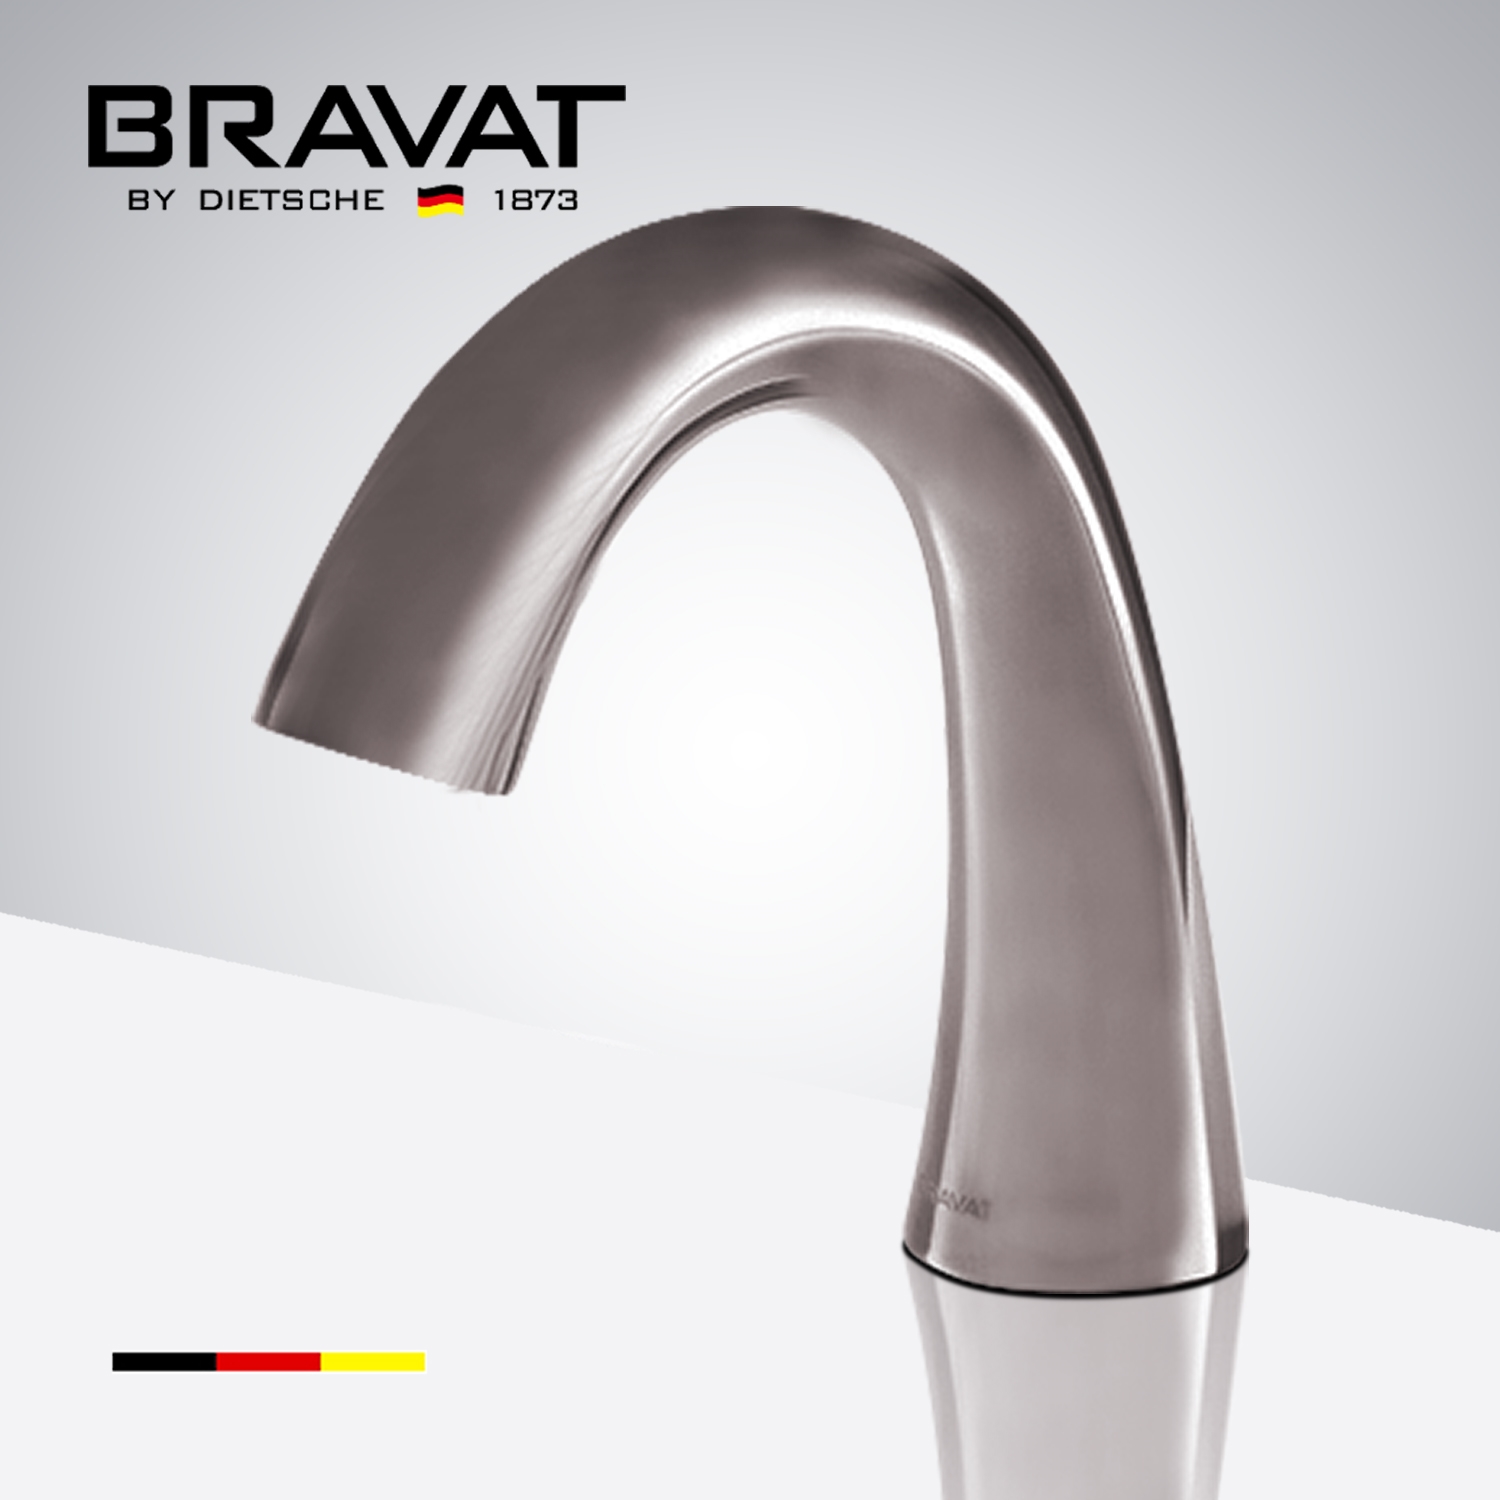 Bravat Brushed Nickel Commercial Automatic Electronic Sensor Faucet